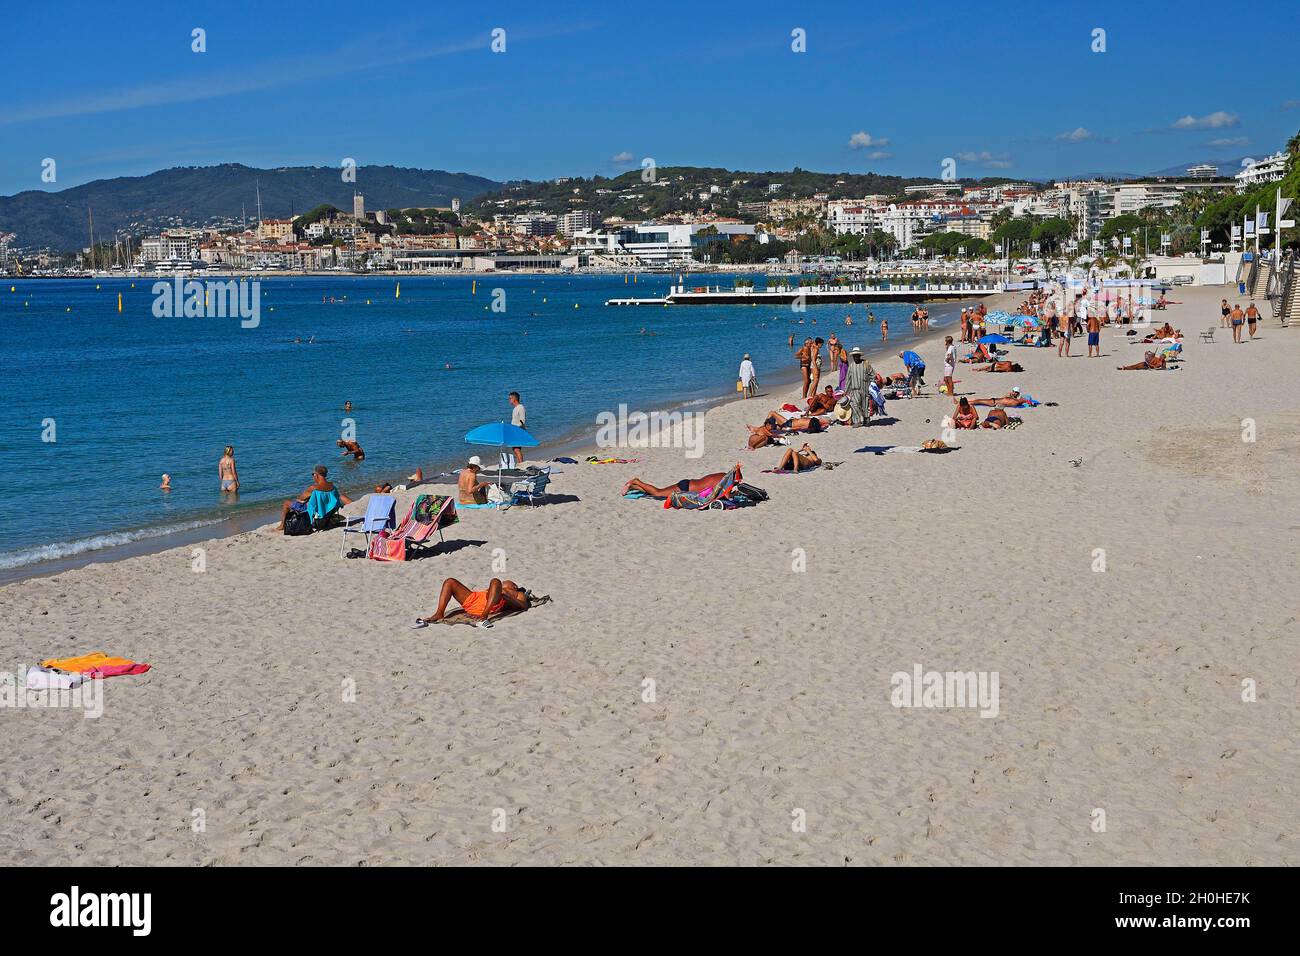 Beach and bay of Cannes, Cote d'Azur, Provence-Alpes-Cote d'Azur, South of France, France Stock Photo